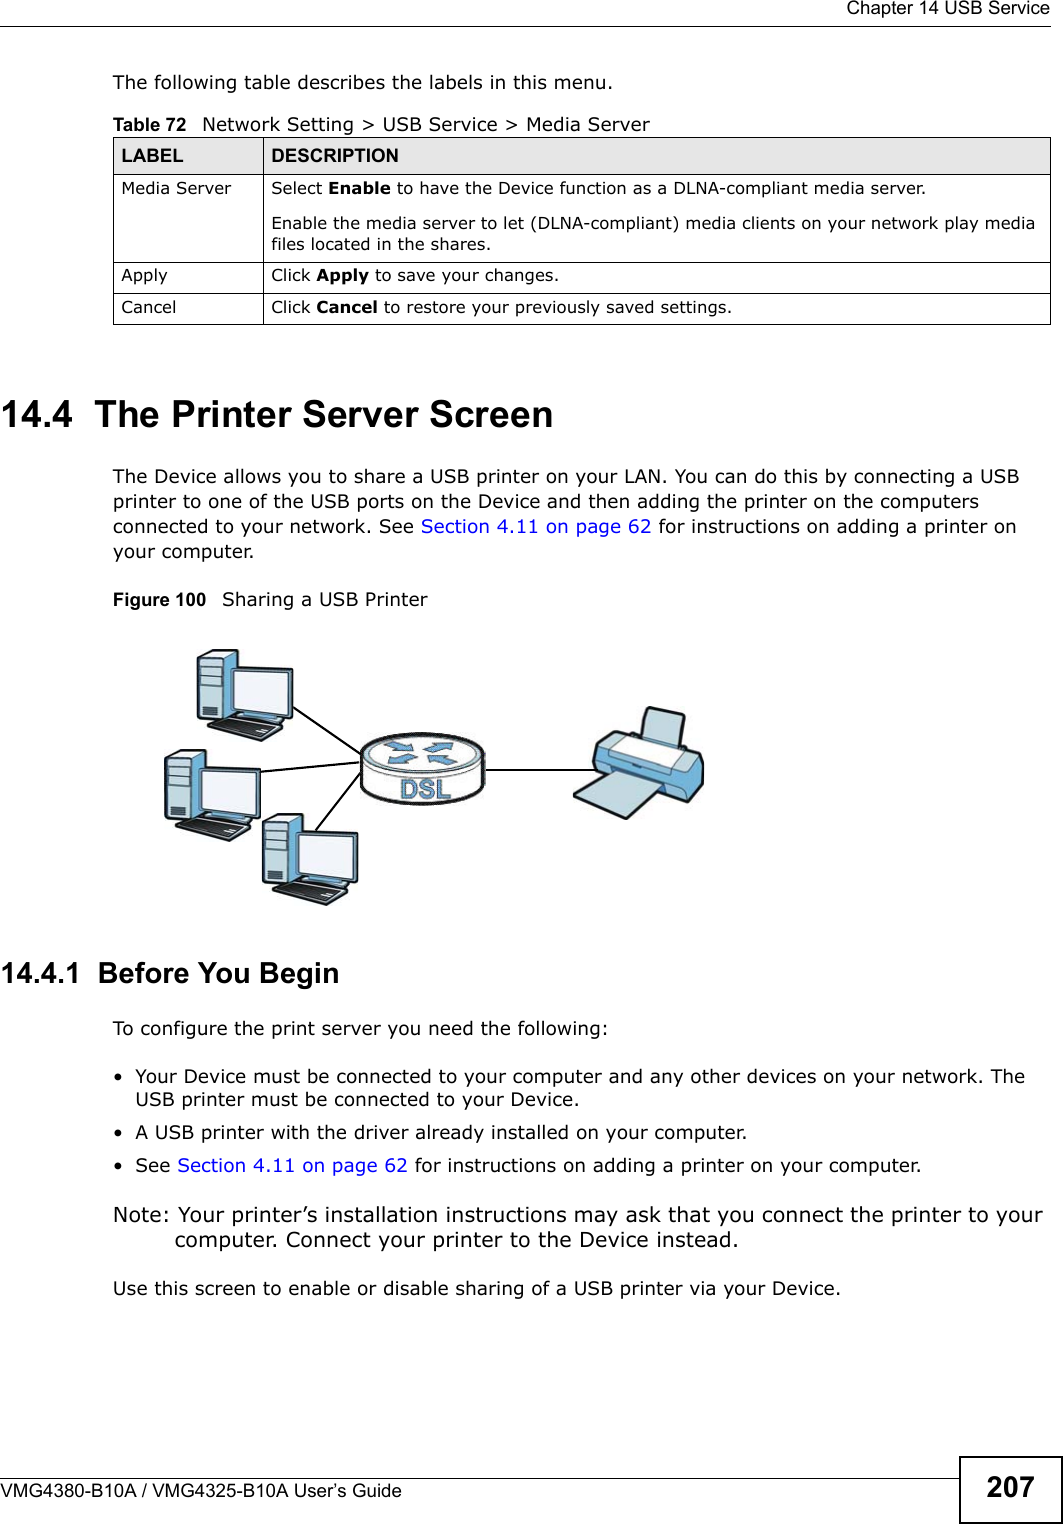 Chapter 14 USB ServiceVMG4380-B10A / VMG4325-B10A User’s Guide 207The following table describes the labels in this menu.14.4  The Printer Server ScreenThe Device allows you to share a USB printer on your LAN. You can do this by connecting a USBprinter to one of the USB ports on the Device and then adding the printer on the computers connected to your network. See Section 4.11 on page 62 for instructions on adding a printer on your computer.Figure 100   Sharing a USB Printer14.4.1  Before You BeginTo configure the print server you need the following:• Your Device must be connected to your computer and any other devices on your network. TheUSB printer must be connected to your Device.• A USB printer with the driver already installed on your computer.• See Section 4.11 on page 62 for instructions on adding a printer on your computer. Note: Your printer’s installation instructions may ask that you connect the printer to your computer. Connect your printer to the Device instead.Use this screen to enable or disable sharing of a USB printer via your Device. Table 72   Network Setting &gt; USB Service &gt; Media ServerLABEL DESCRIPTIONMedia Server Select Enable to have the Device function as a DLNA-compliant media server.Enable the media server to let (DLNA-compliant) media clients on your network play media files located in the shares.Apply Click Apply to save your changes.Cancel Click Cancel to restore your previously saved settings.